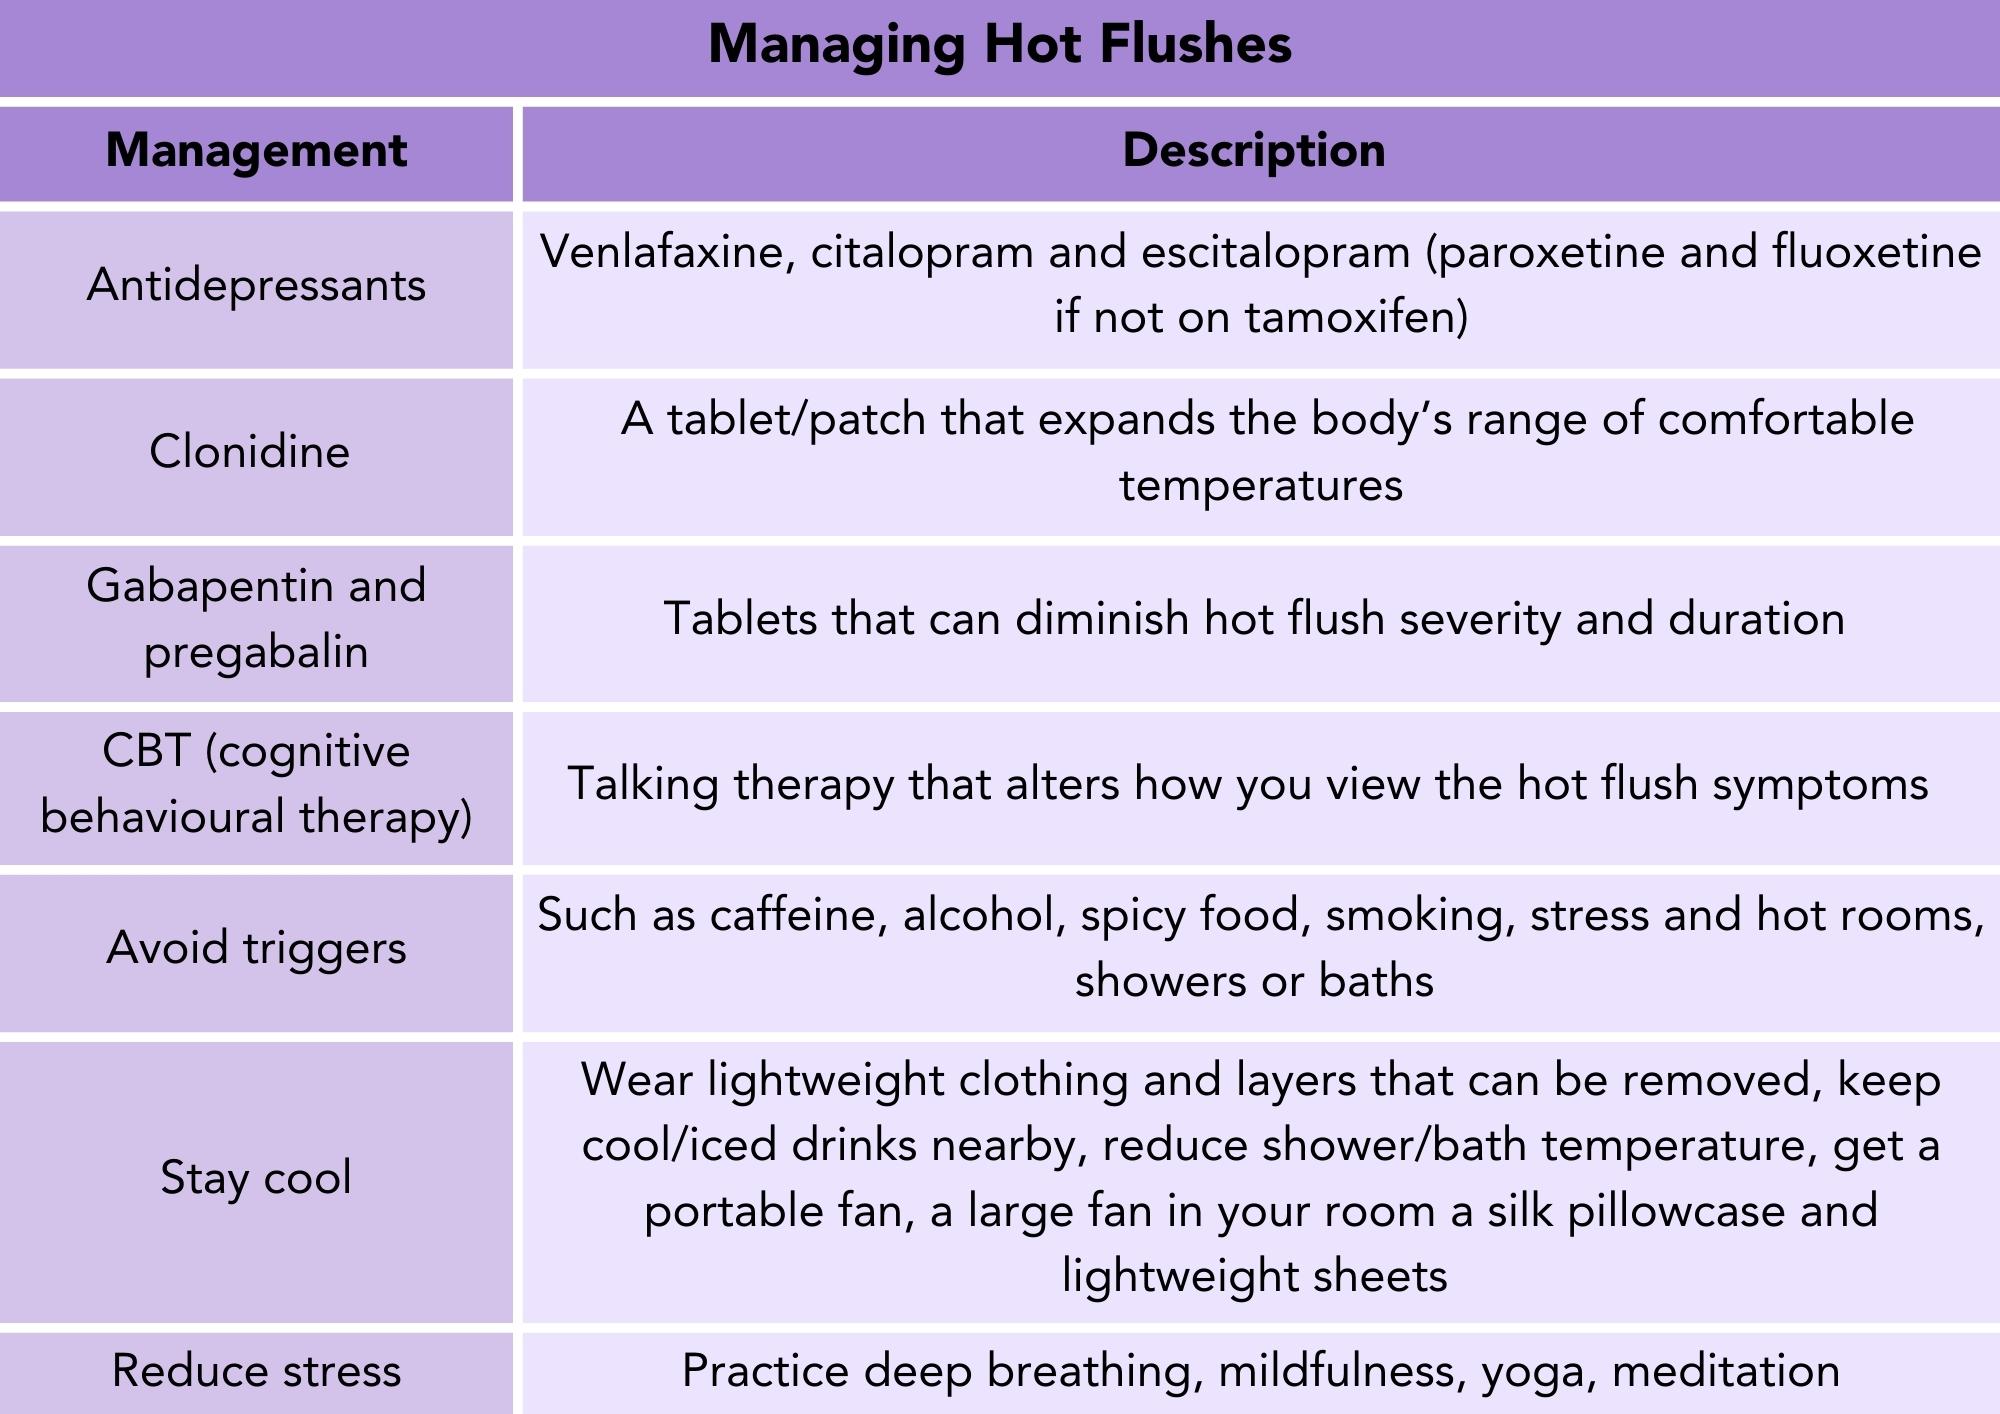 Techniques to manage hot flushes caused by breast cancer treatment